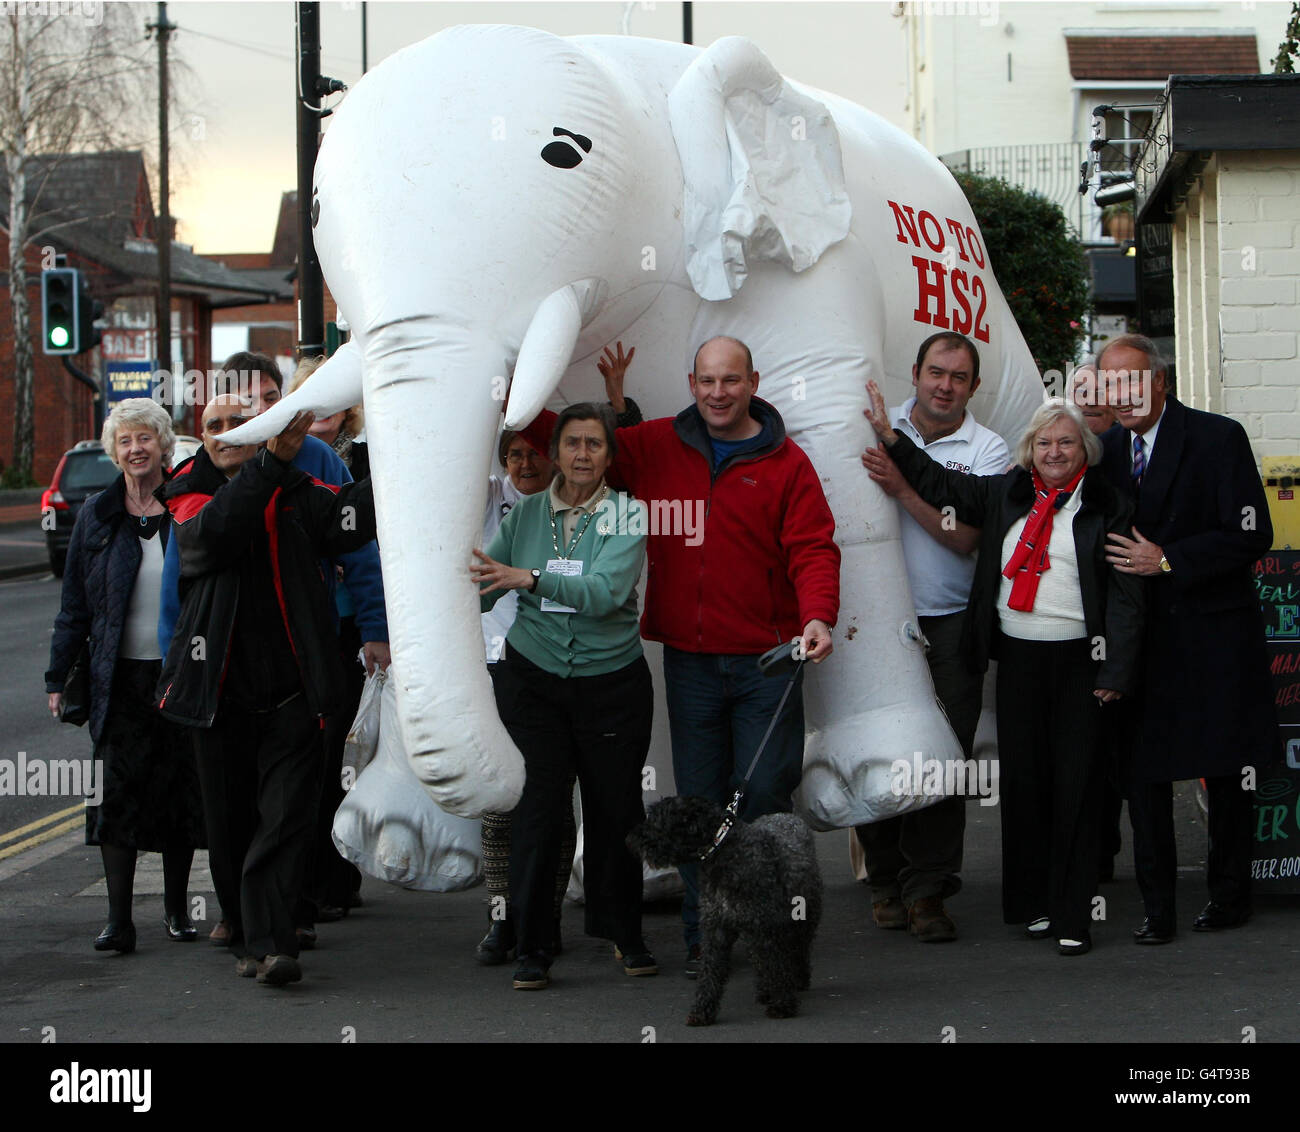 Members of the 'Stop HS2' campaign carry a white elephant to The Earl of Clarendon pub in Kenilworth, Warwickshire where they watched Transport Secretary Justine Greening make a statement to the House of Commons. Stock Photo